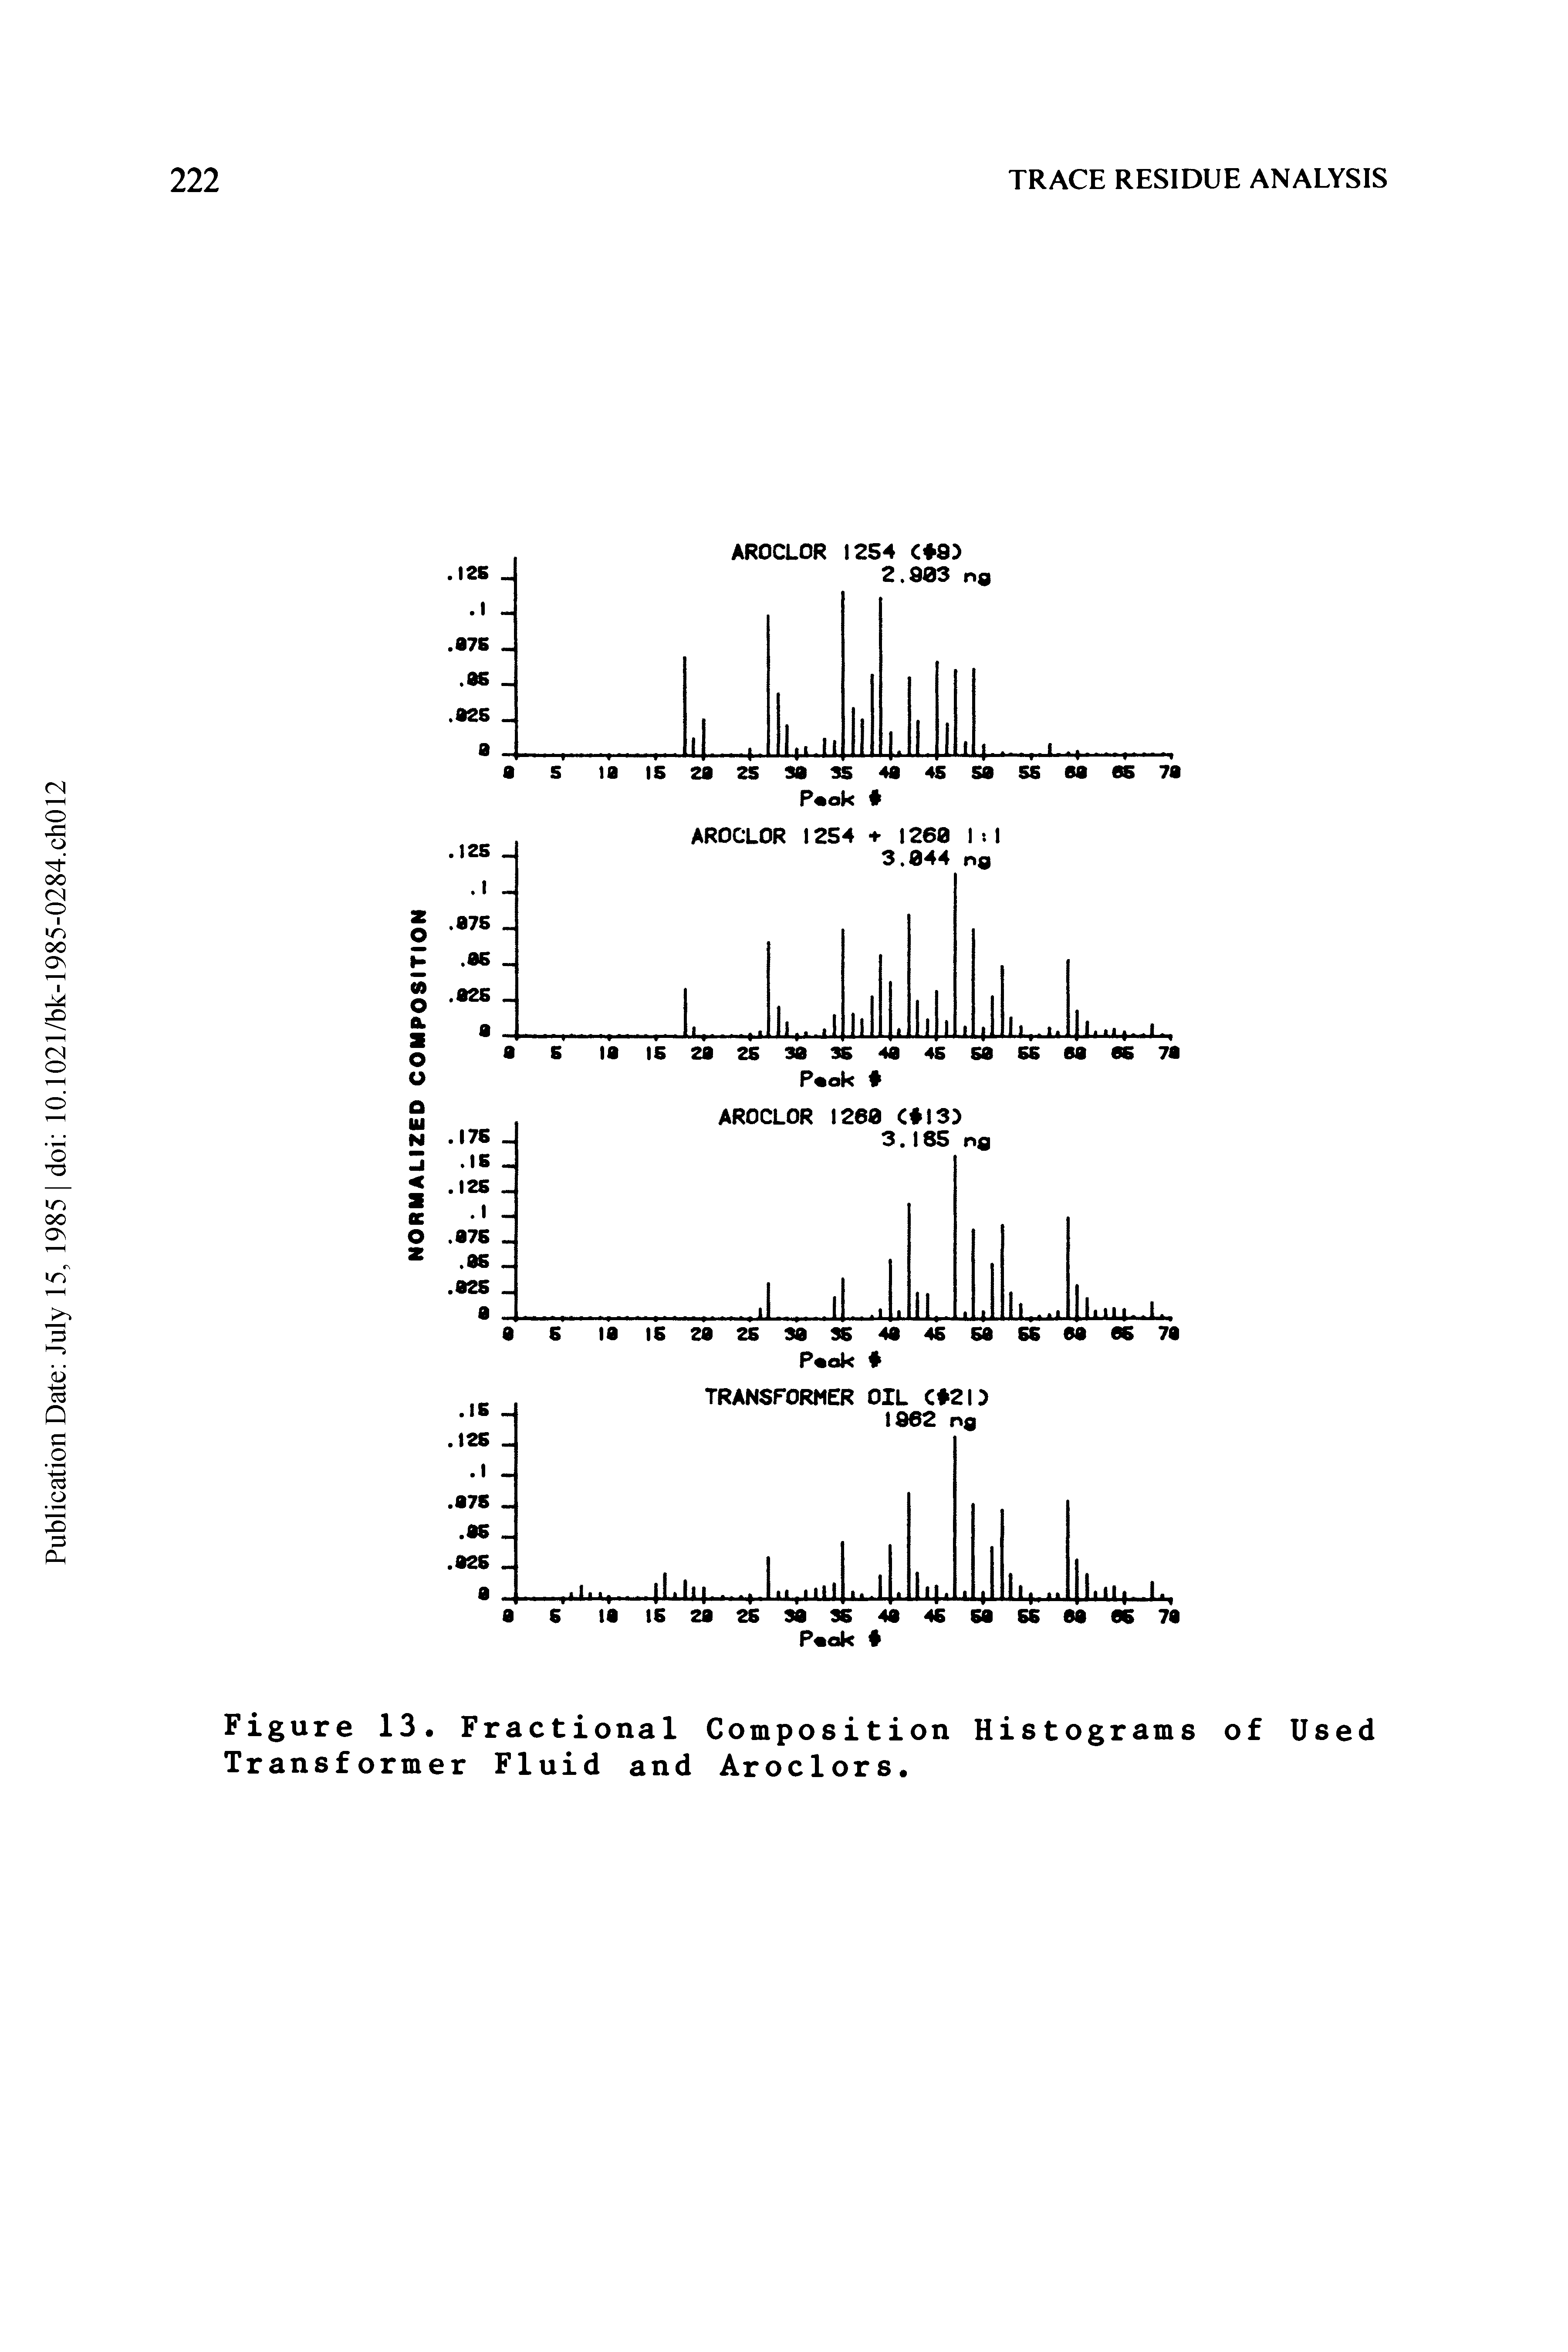 Figure 13. Fractional Composition Histograms of Used Transformer Fluid and Aroclors.